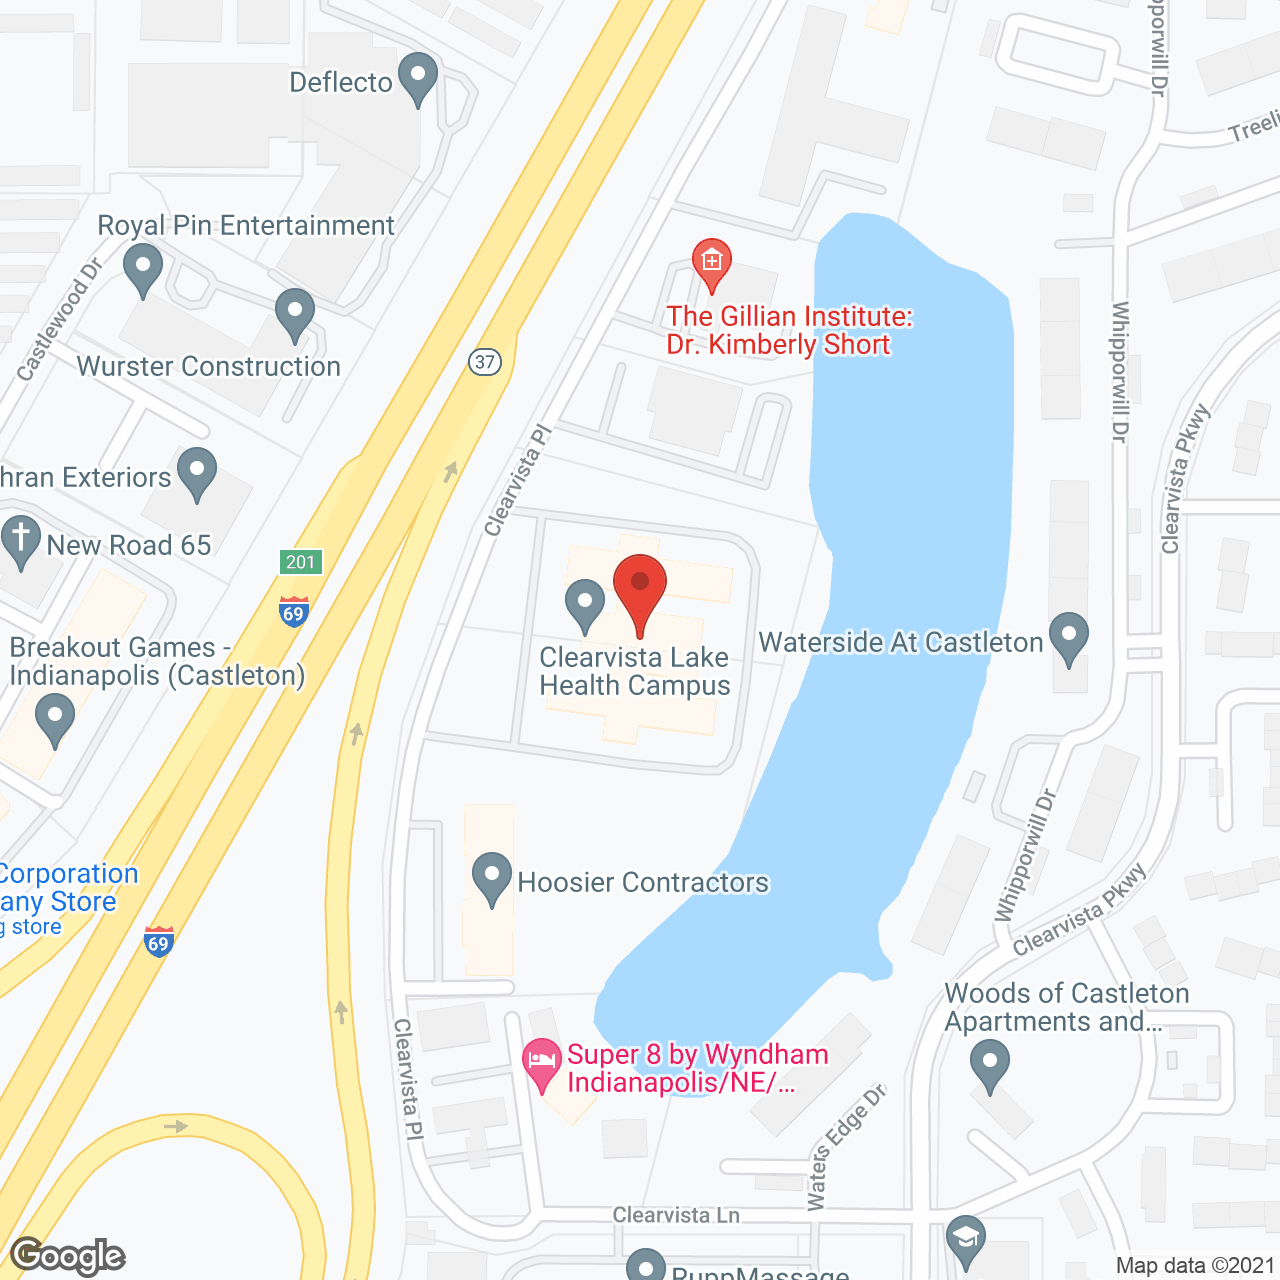 Clearvista Lake Health Campus in google map